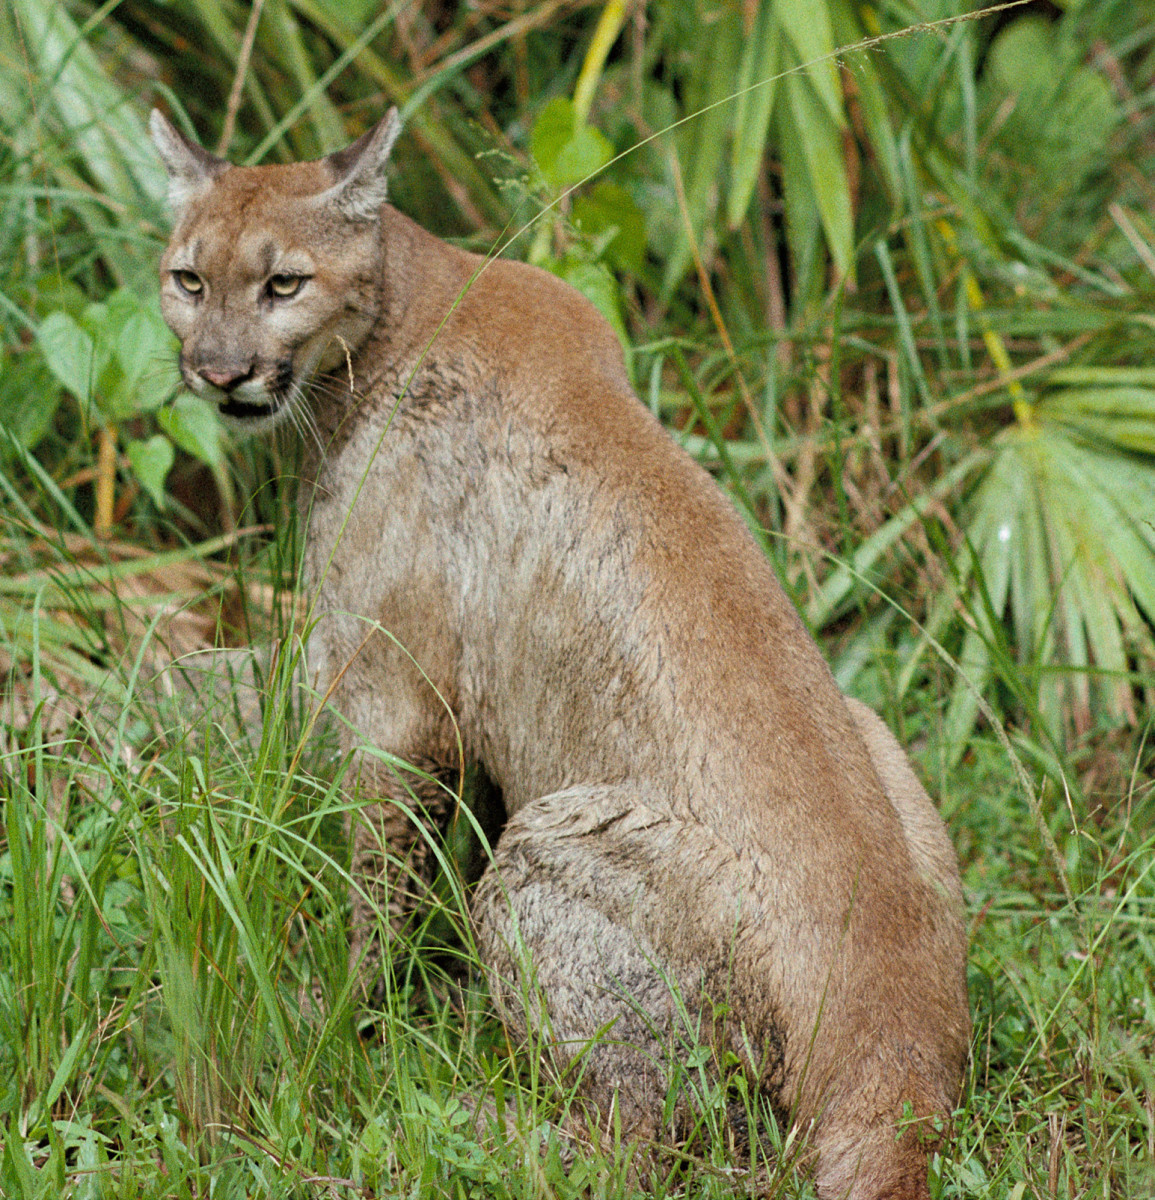 Another photo of a Florida panther on a National Wildlife Refuge. 